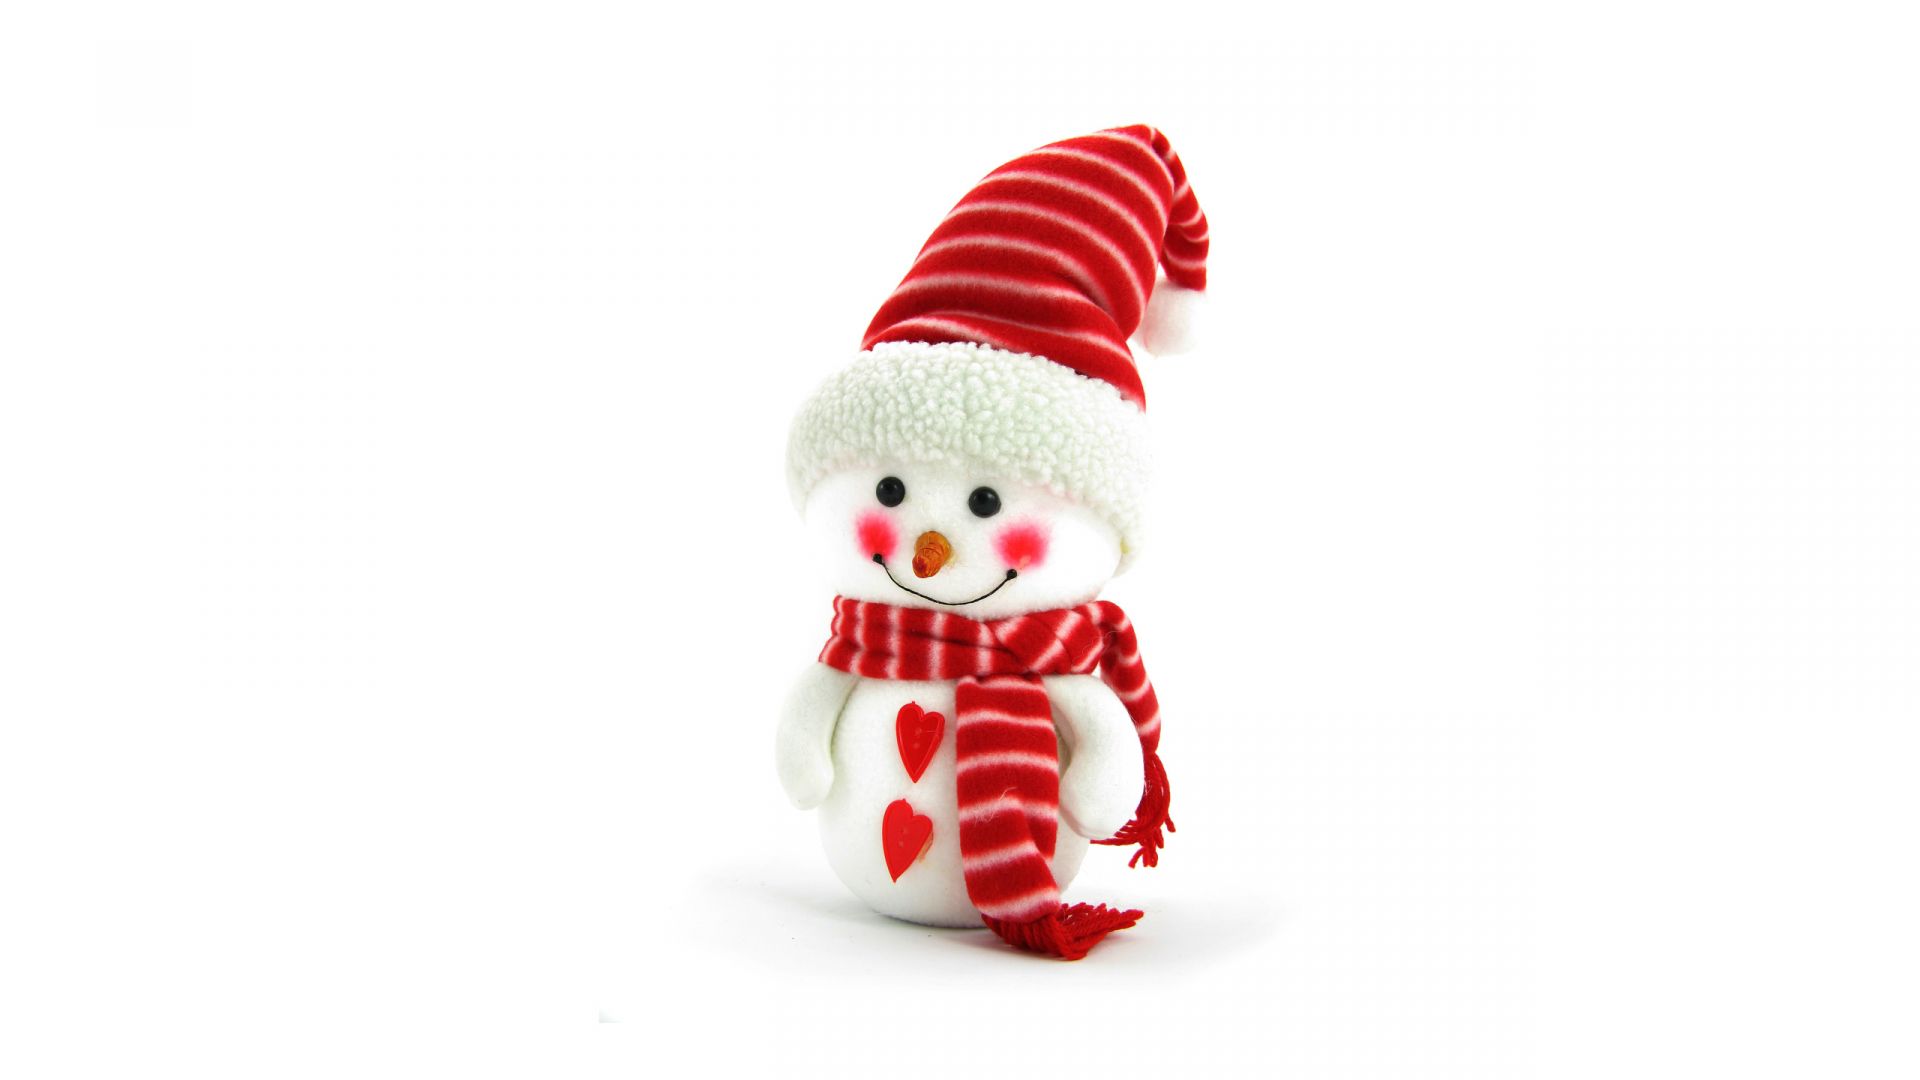 Wallpaper Christmas outfit snowman